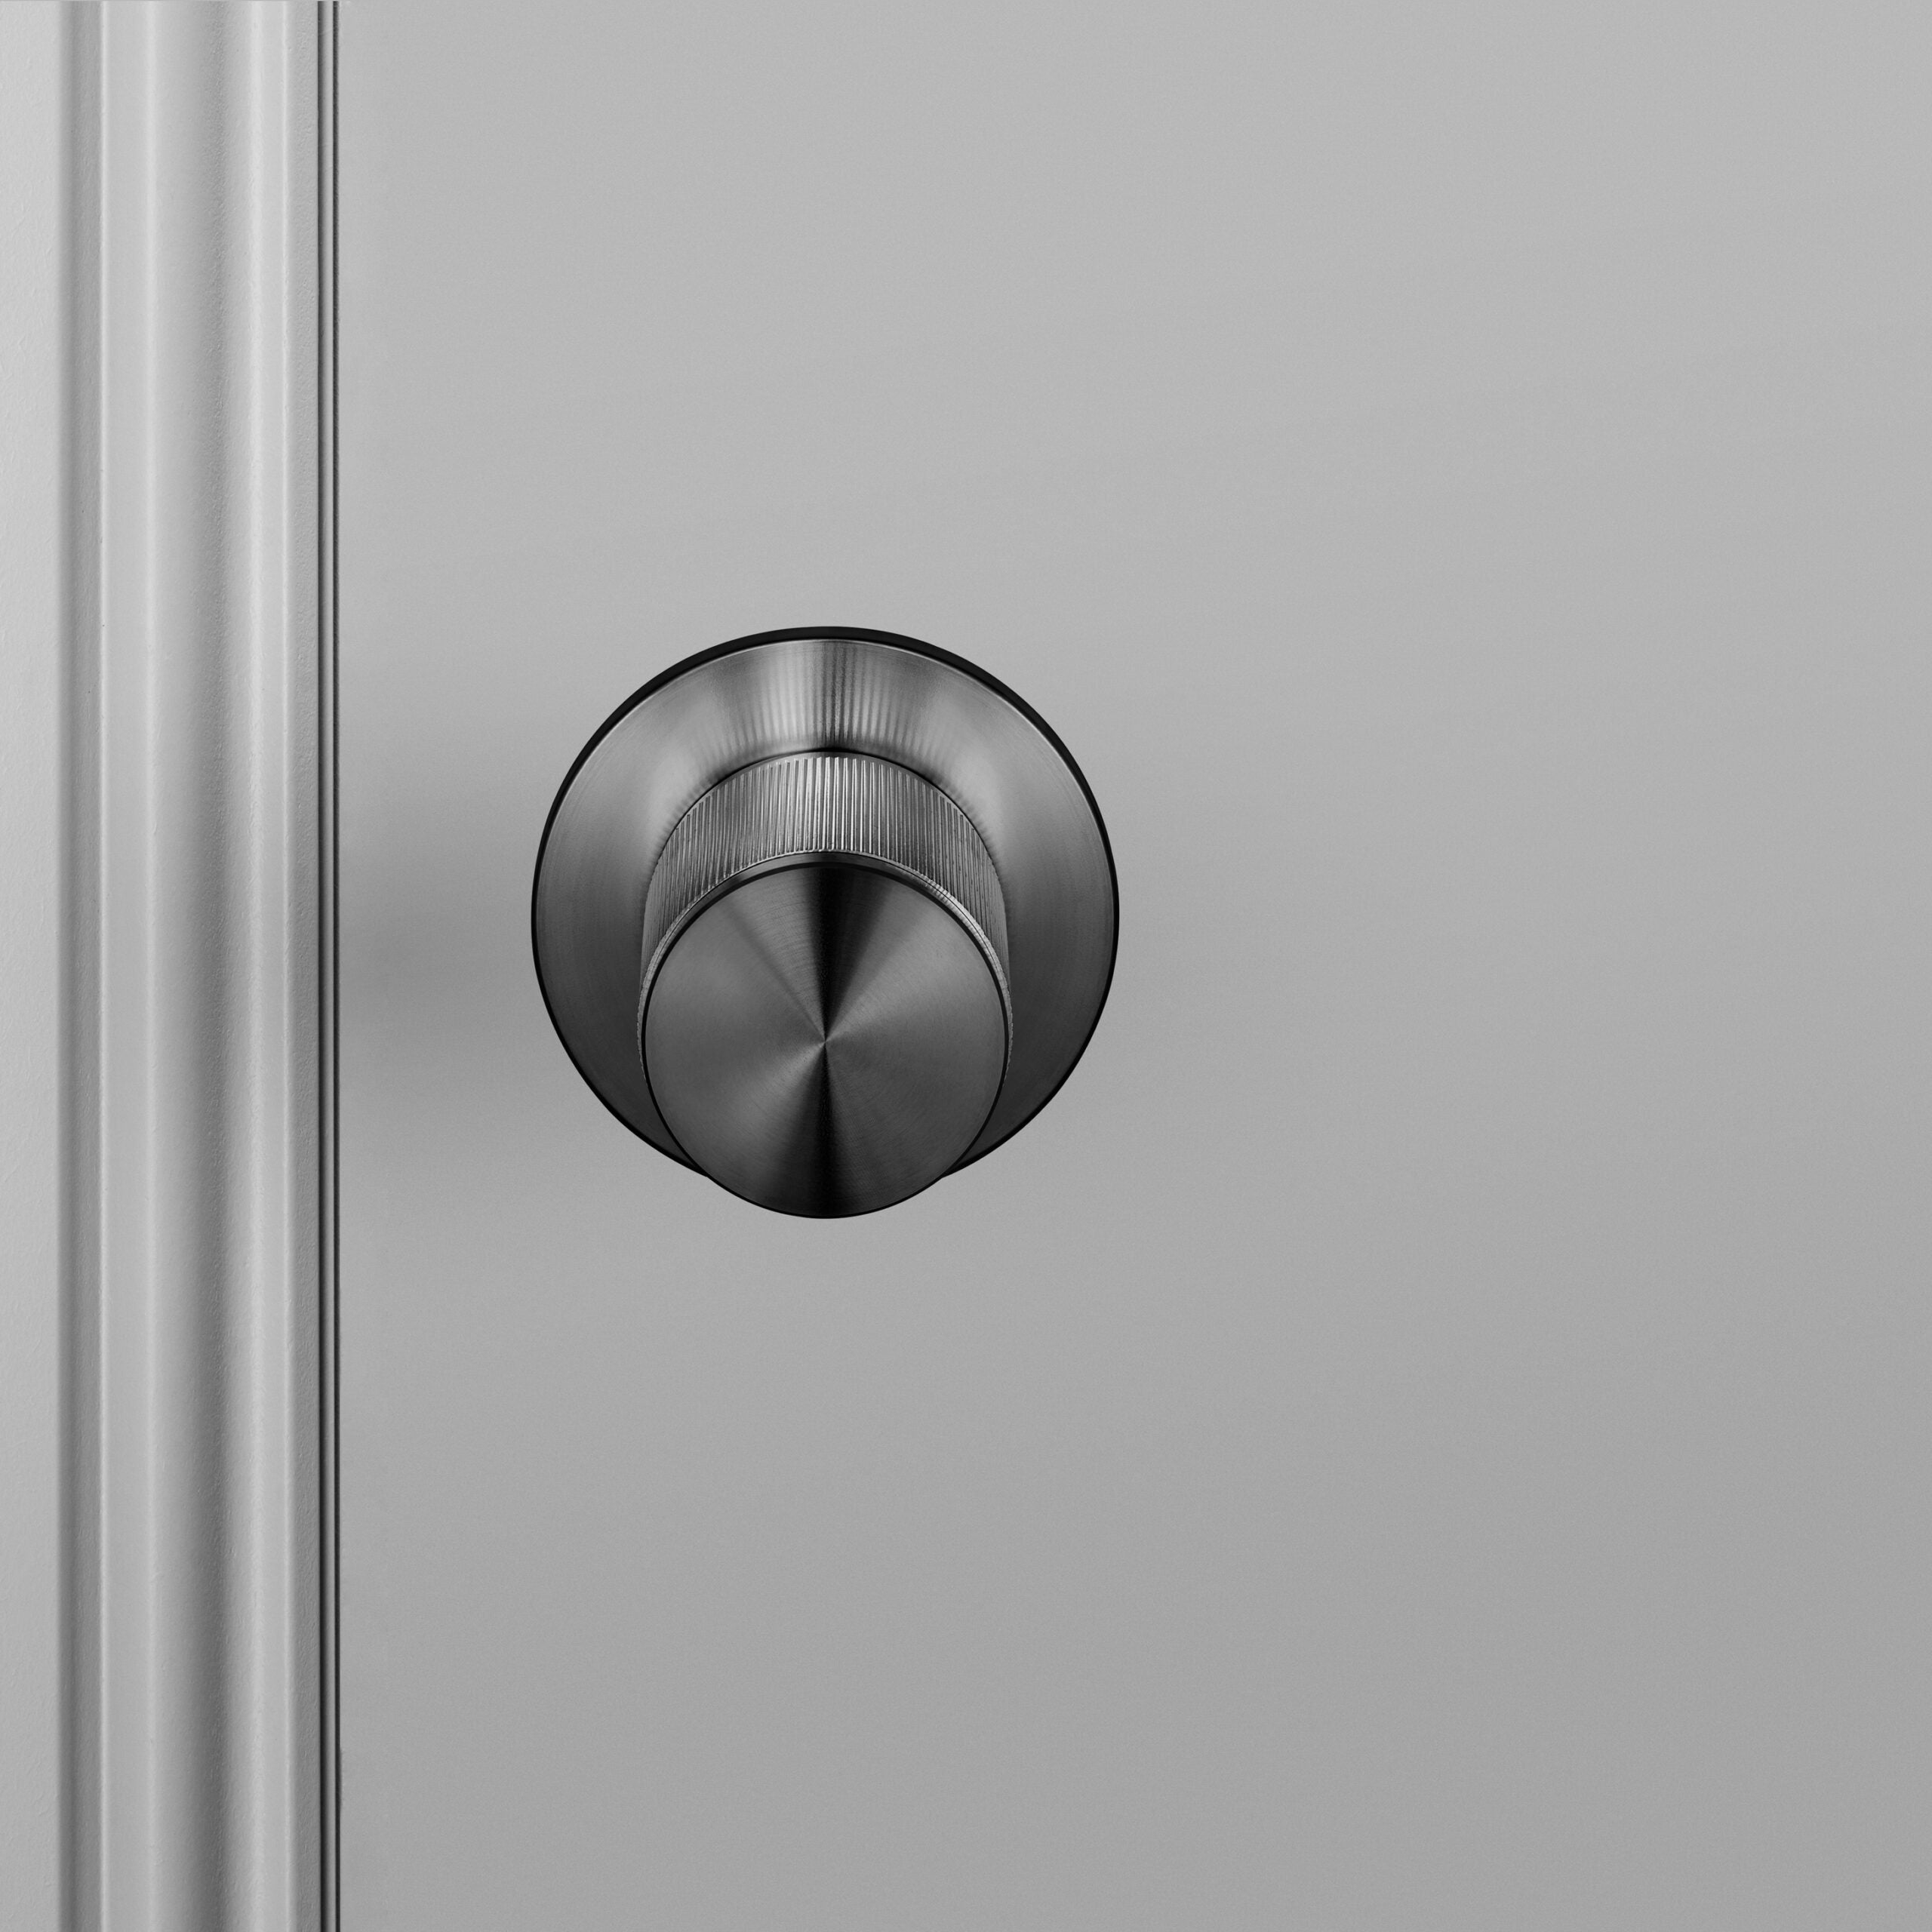 Buster + Punch Door Knob Double Sided, Linear Design, FIXED TYPE Hardware Buster + Punch Gun Metal  